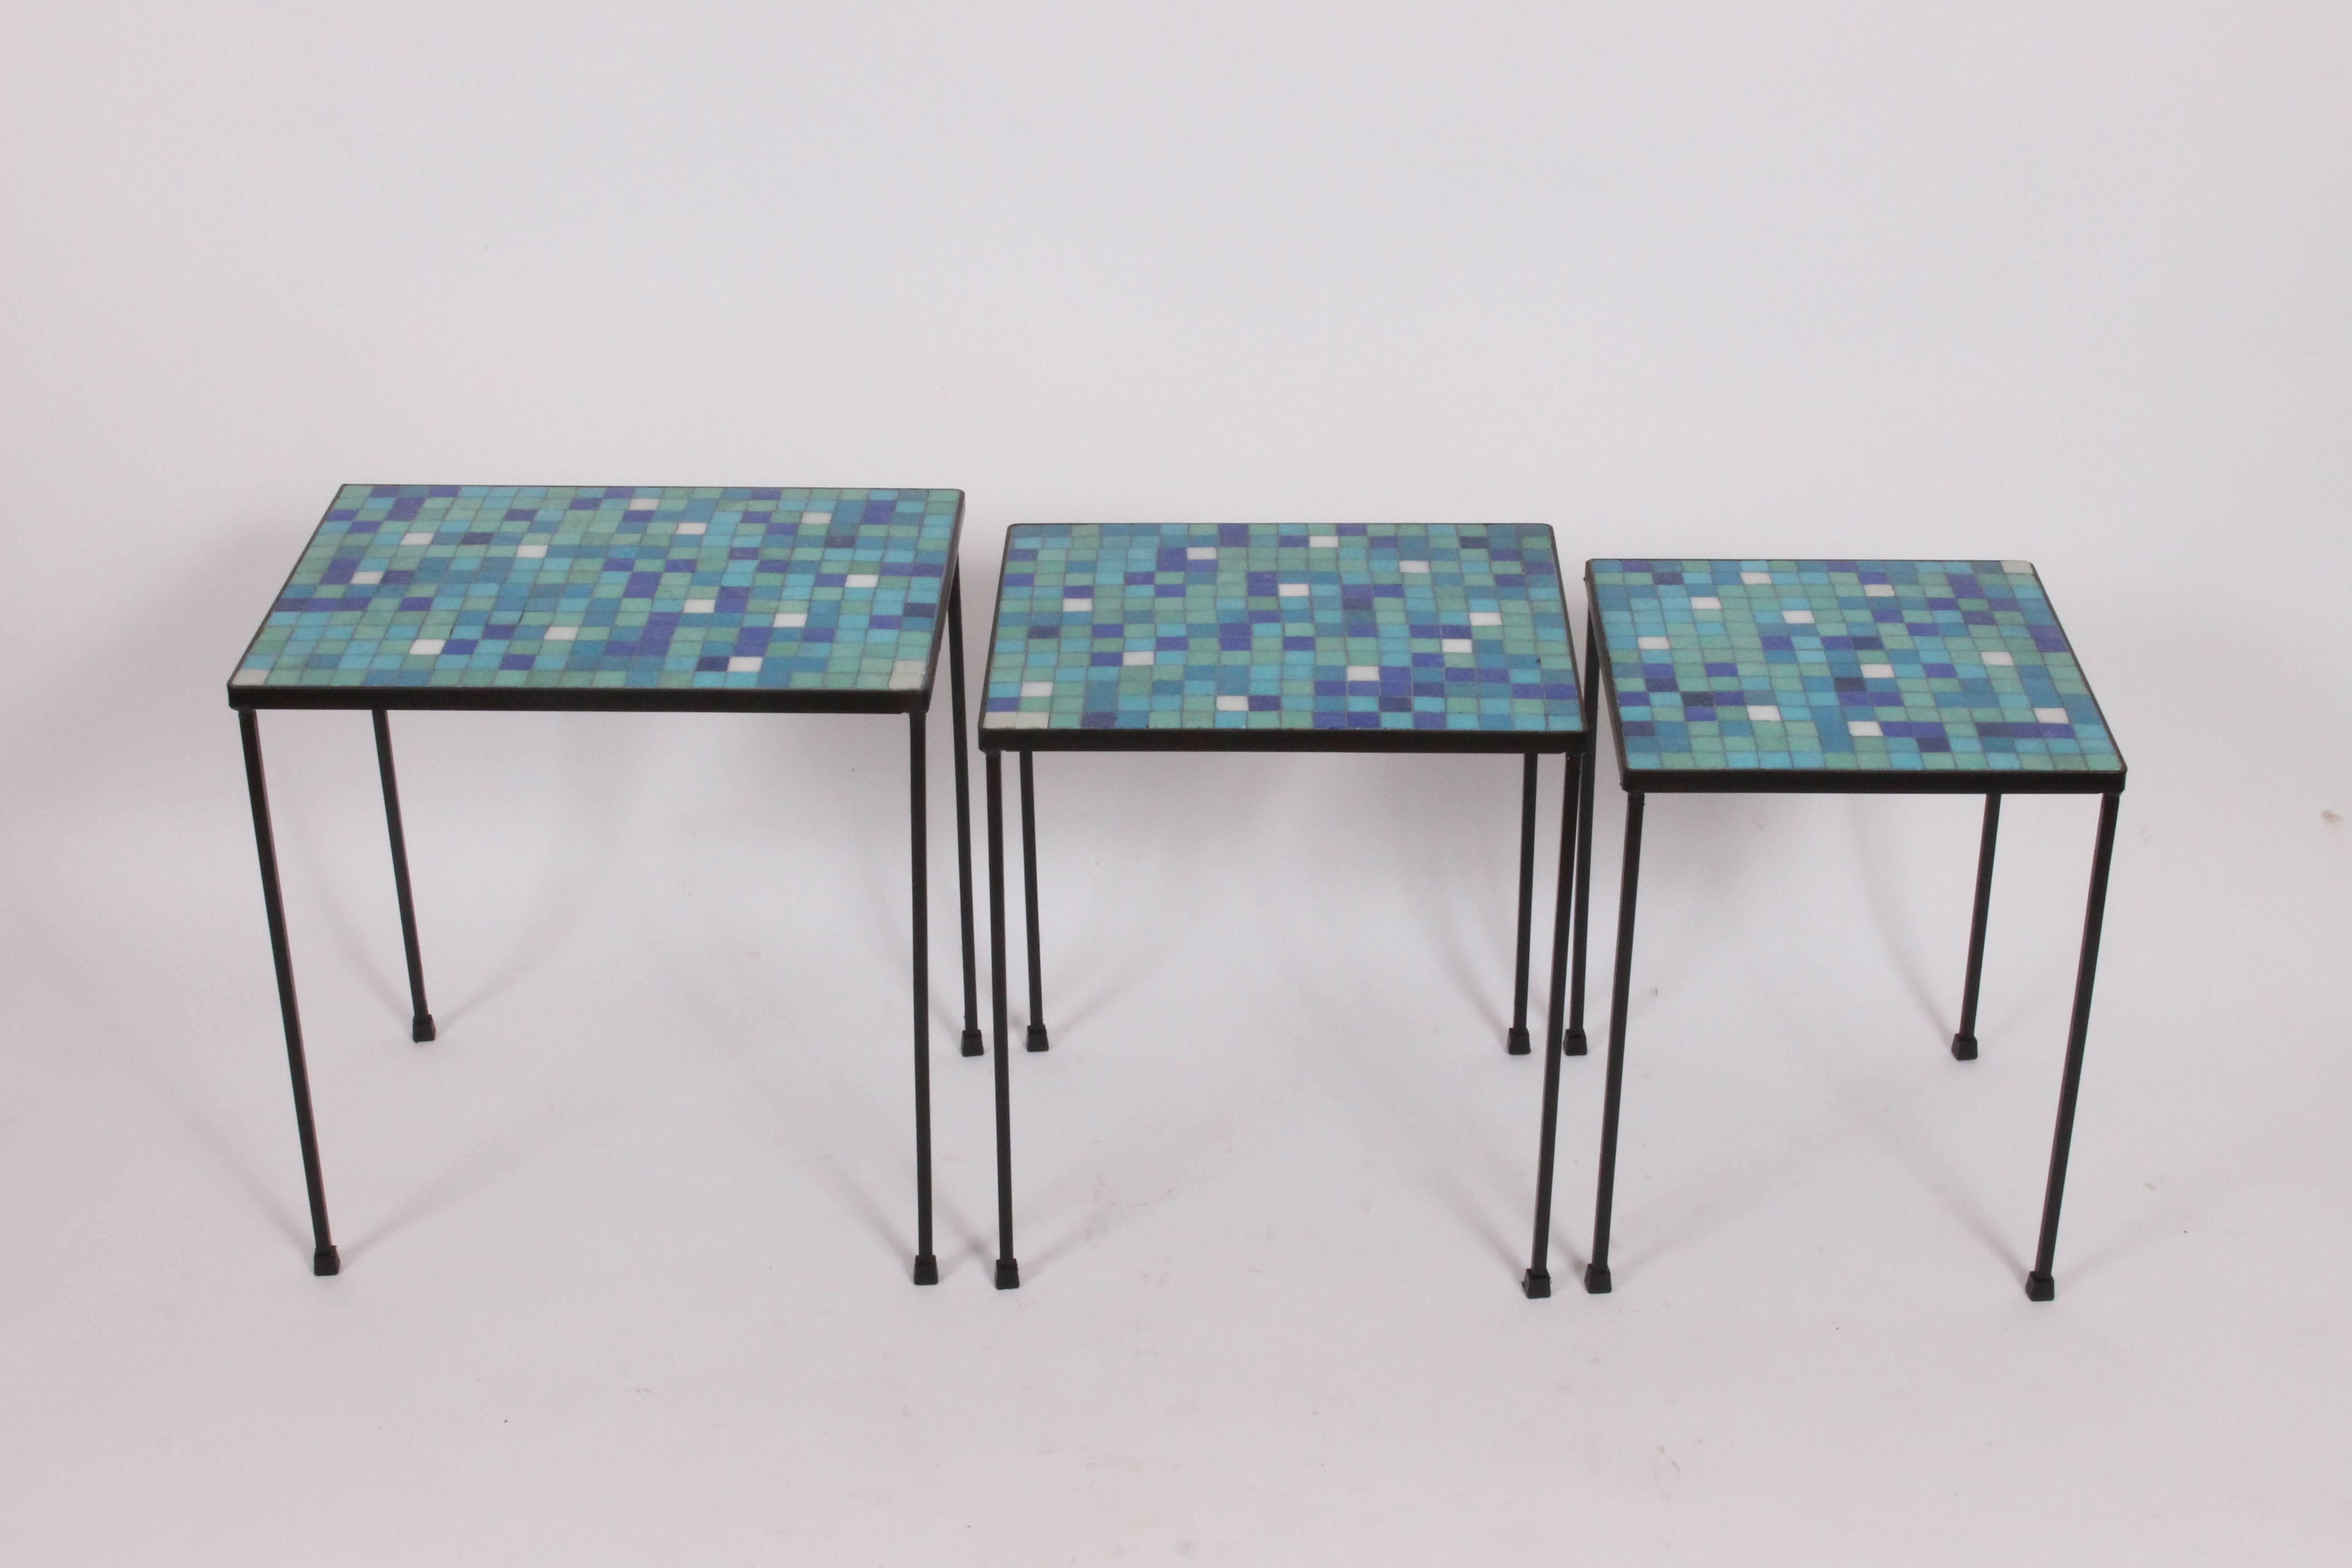 American midcentury black iron and terrazzo tile indoor outdoor tables. Featuring a rectangular wrought iron framework, blue and green hued terrazzo tiles with white accent tiles. Medium table (17 H x 12.5 D x 15 W) small table (16 H x 12.5 D x 12.5